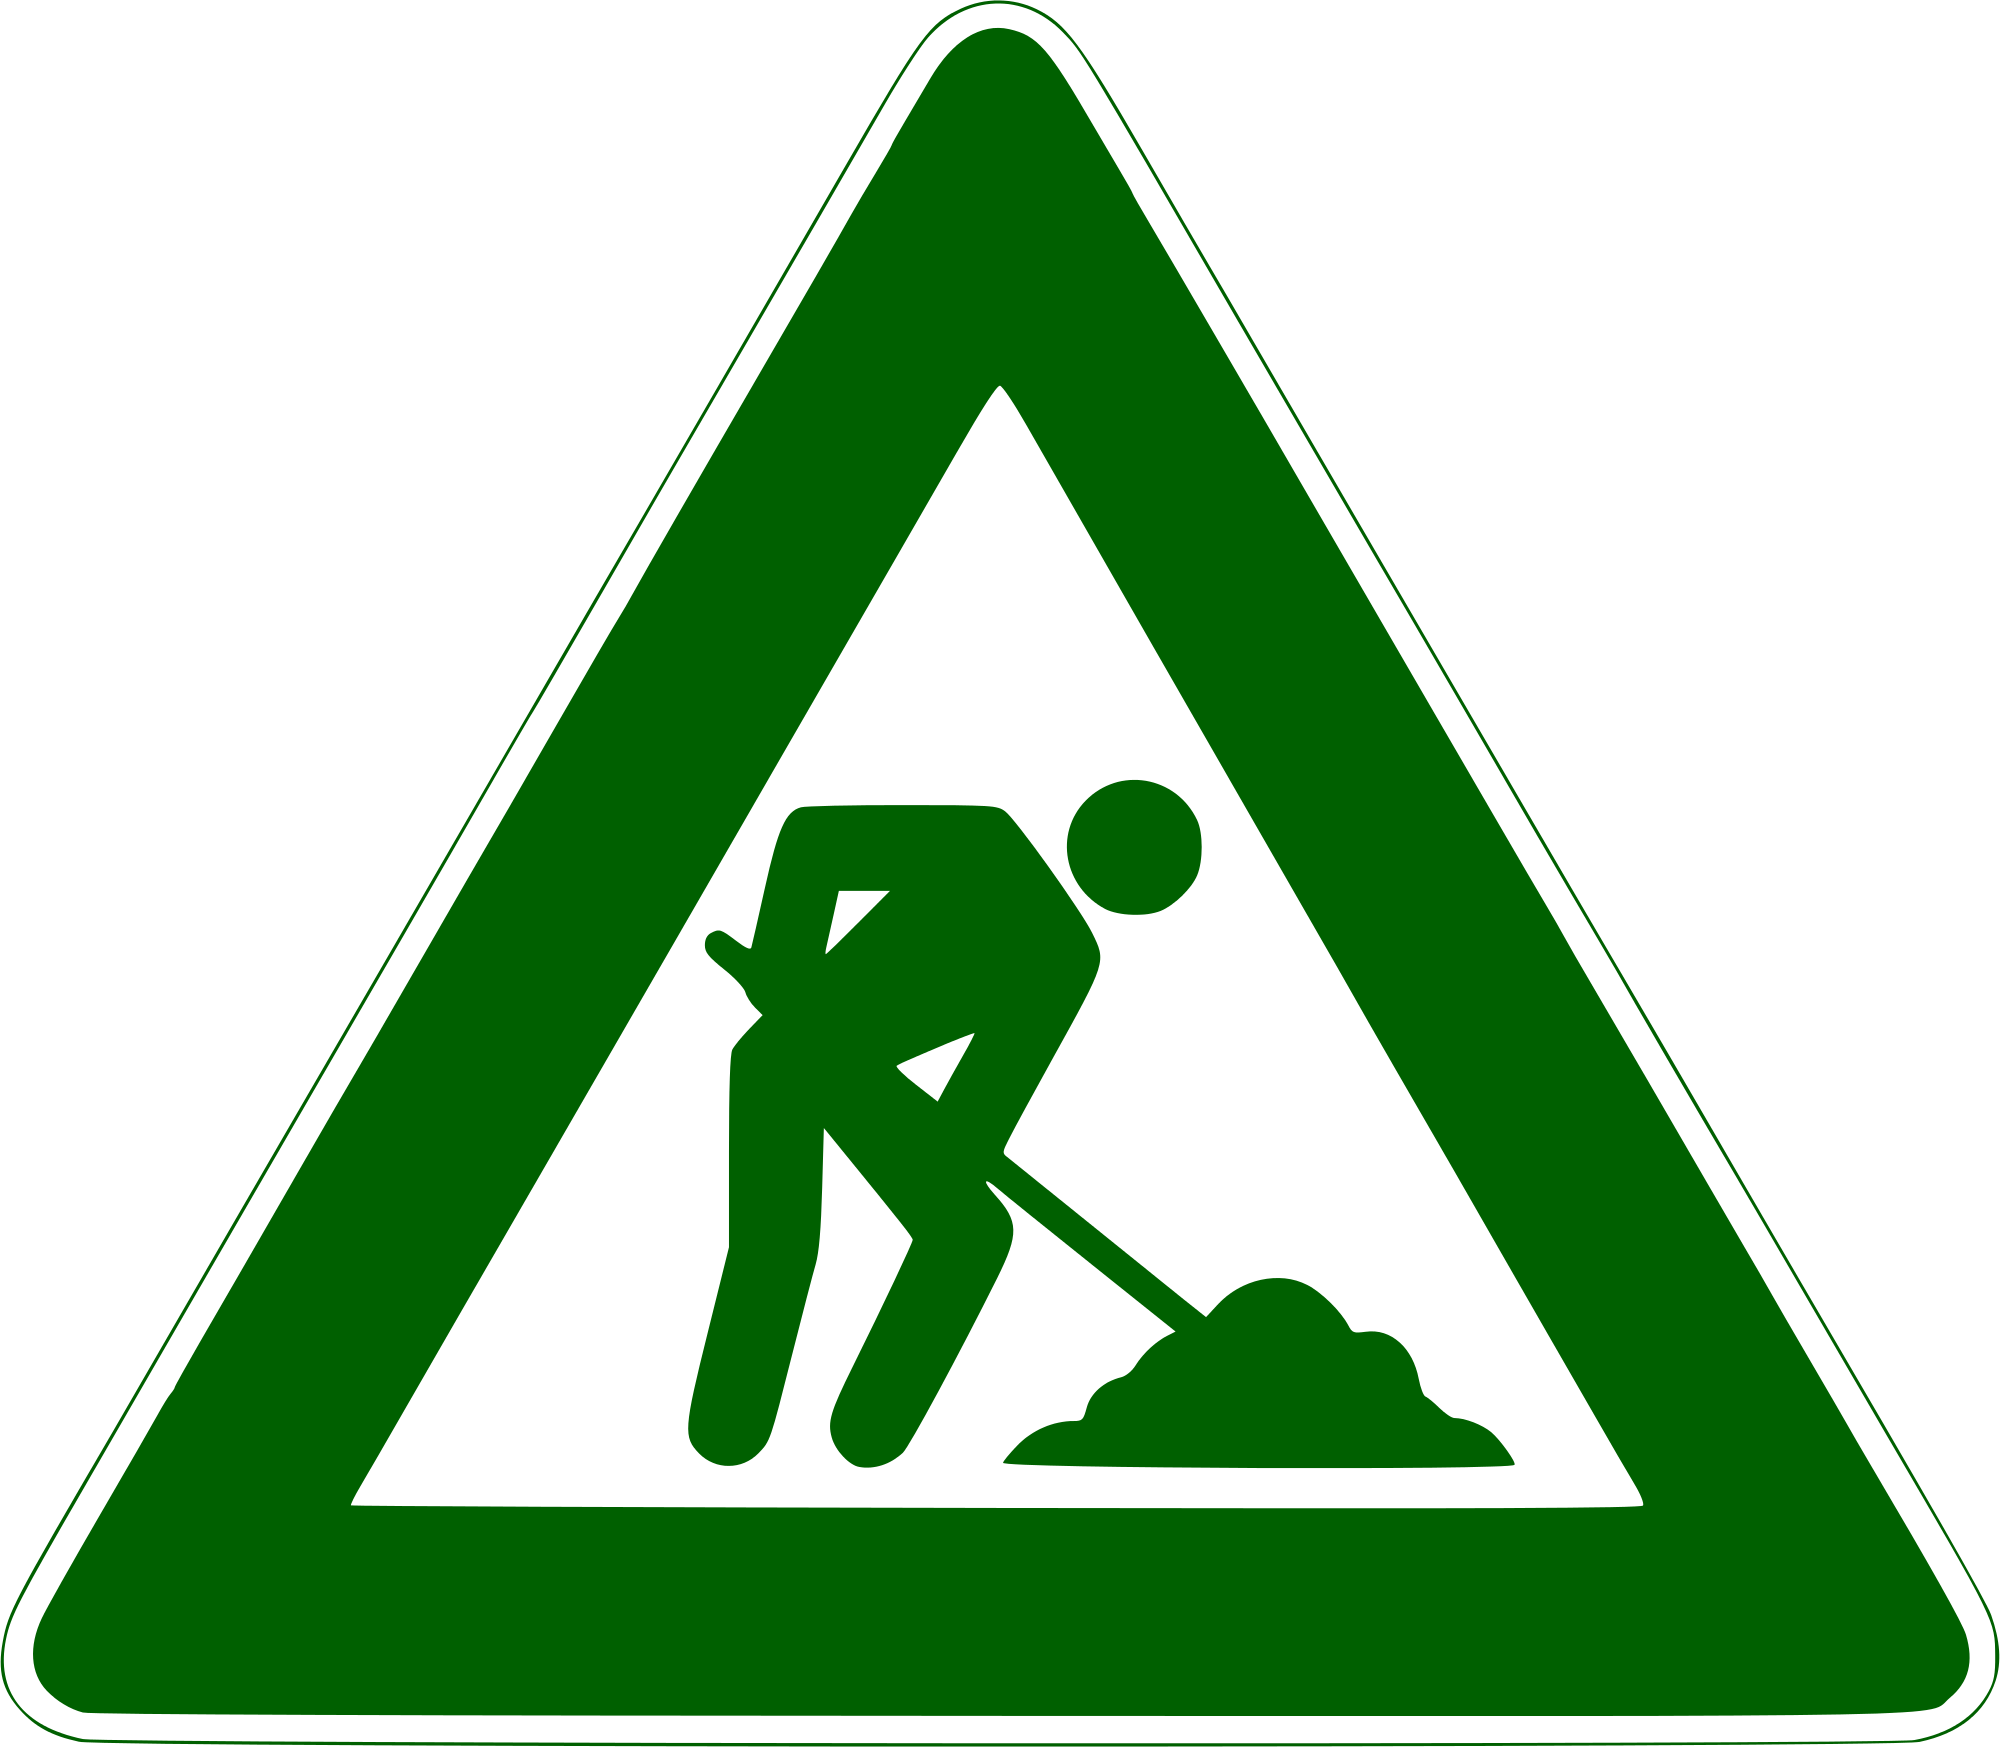 File:Men at work sign (green).svg - Wikimedia Commons